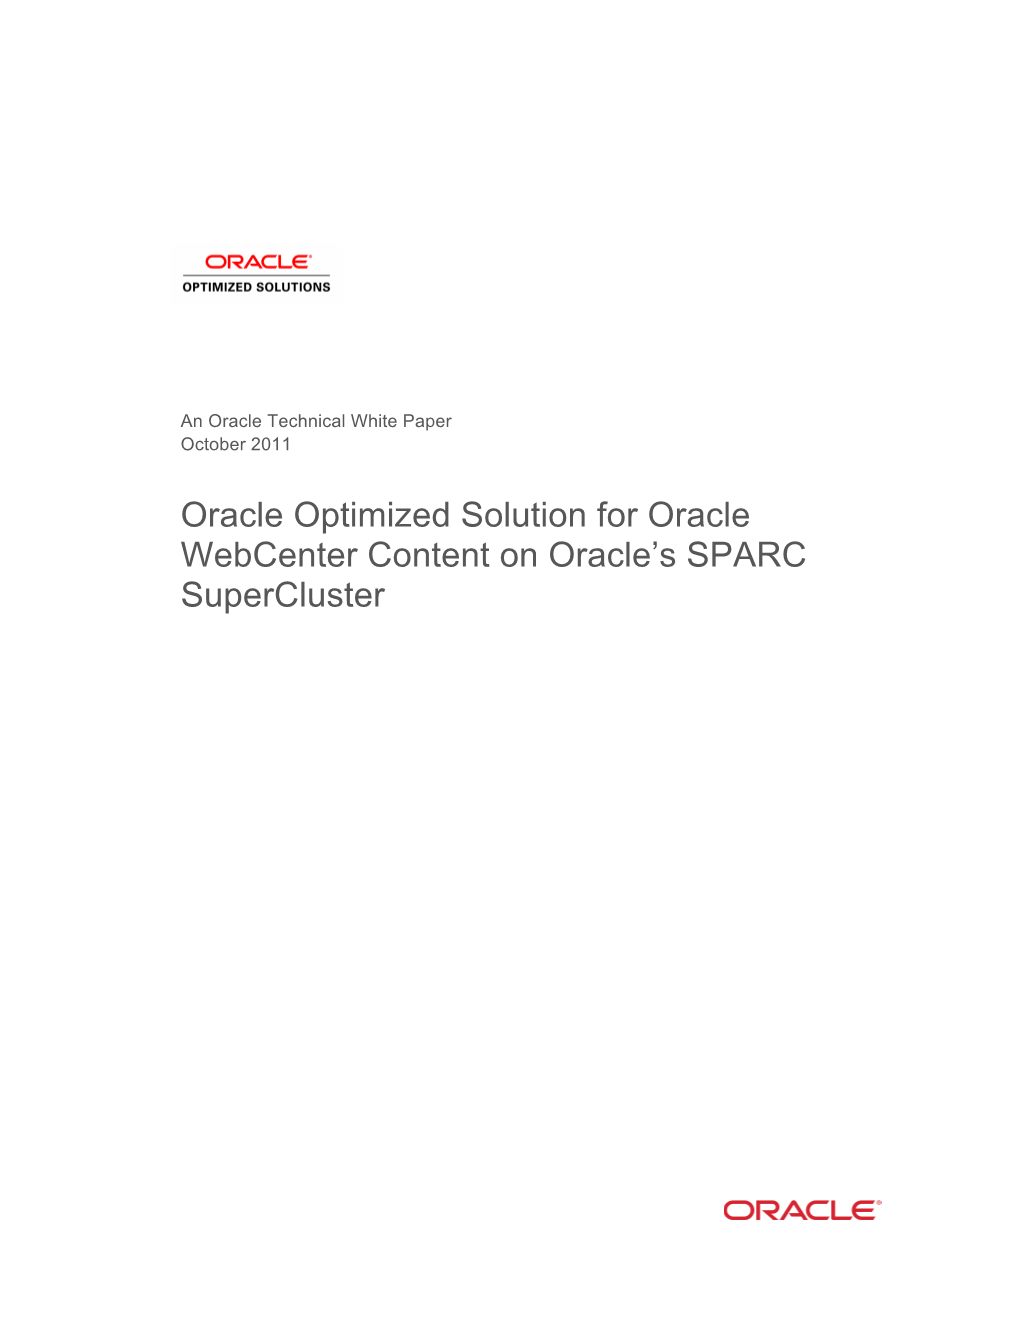 Oracle Optimized Solution for Oracle Webcenter Content on SPARC Supercluster Helps Eliminate the Cost and Risk Associated with Deploying Disparate Solutions